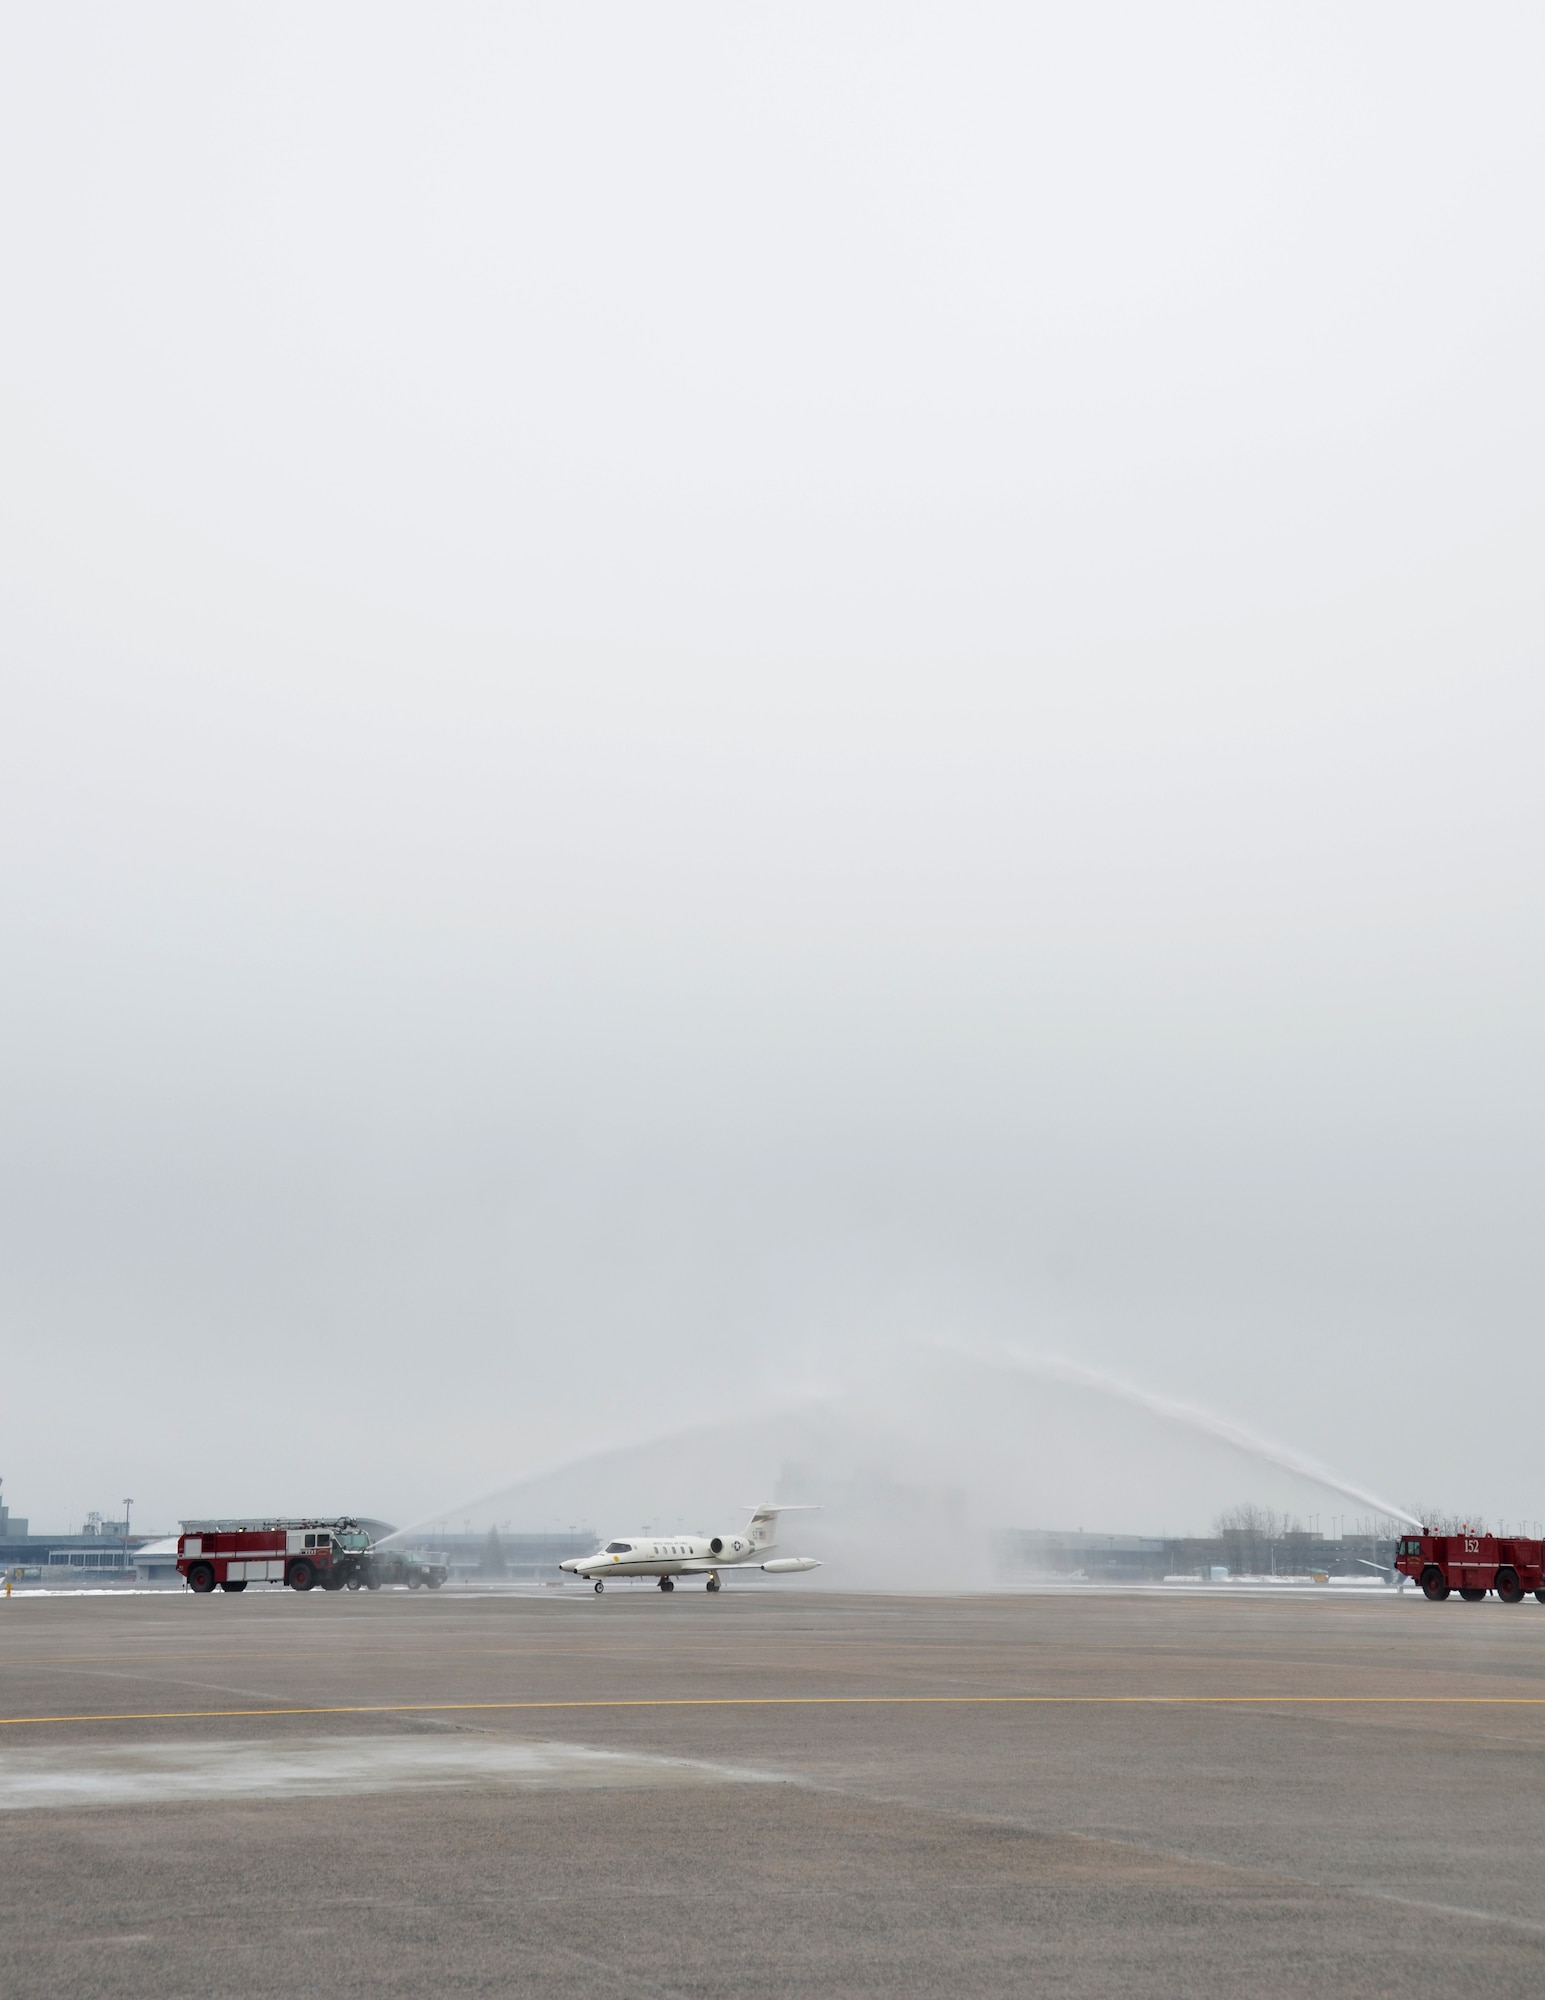 Col. Pete “Meat” Siana, is greeted by the 103rd Fire Department spraying down his C-21 as he taxis onto the flightline after his “fini-flight” at Bradley Air National Guard Base in East Granby, Conn., March 3, 2012. Siana has flown for more than 23 years with the United States Air Force and has logged more than 4,000 military flying hours. (U.S. Air Force photo by Tech. Sgt. Joshua Mead)